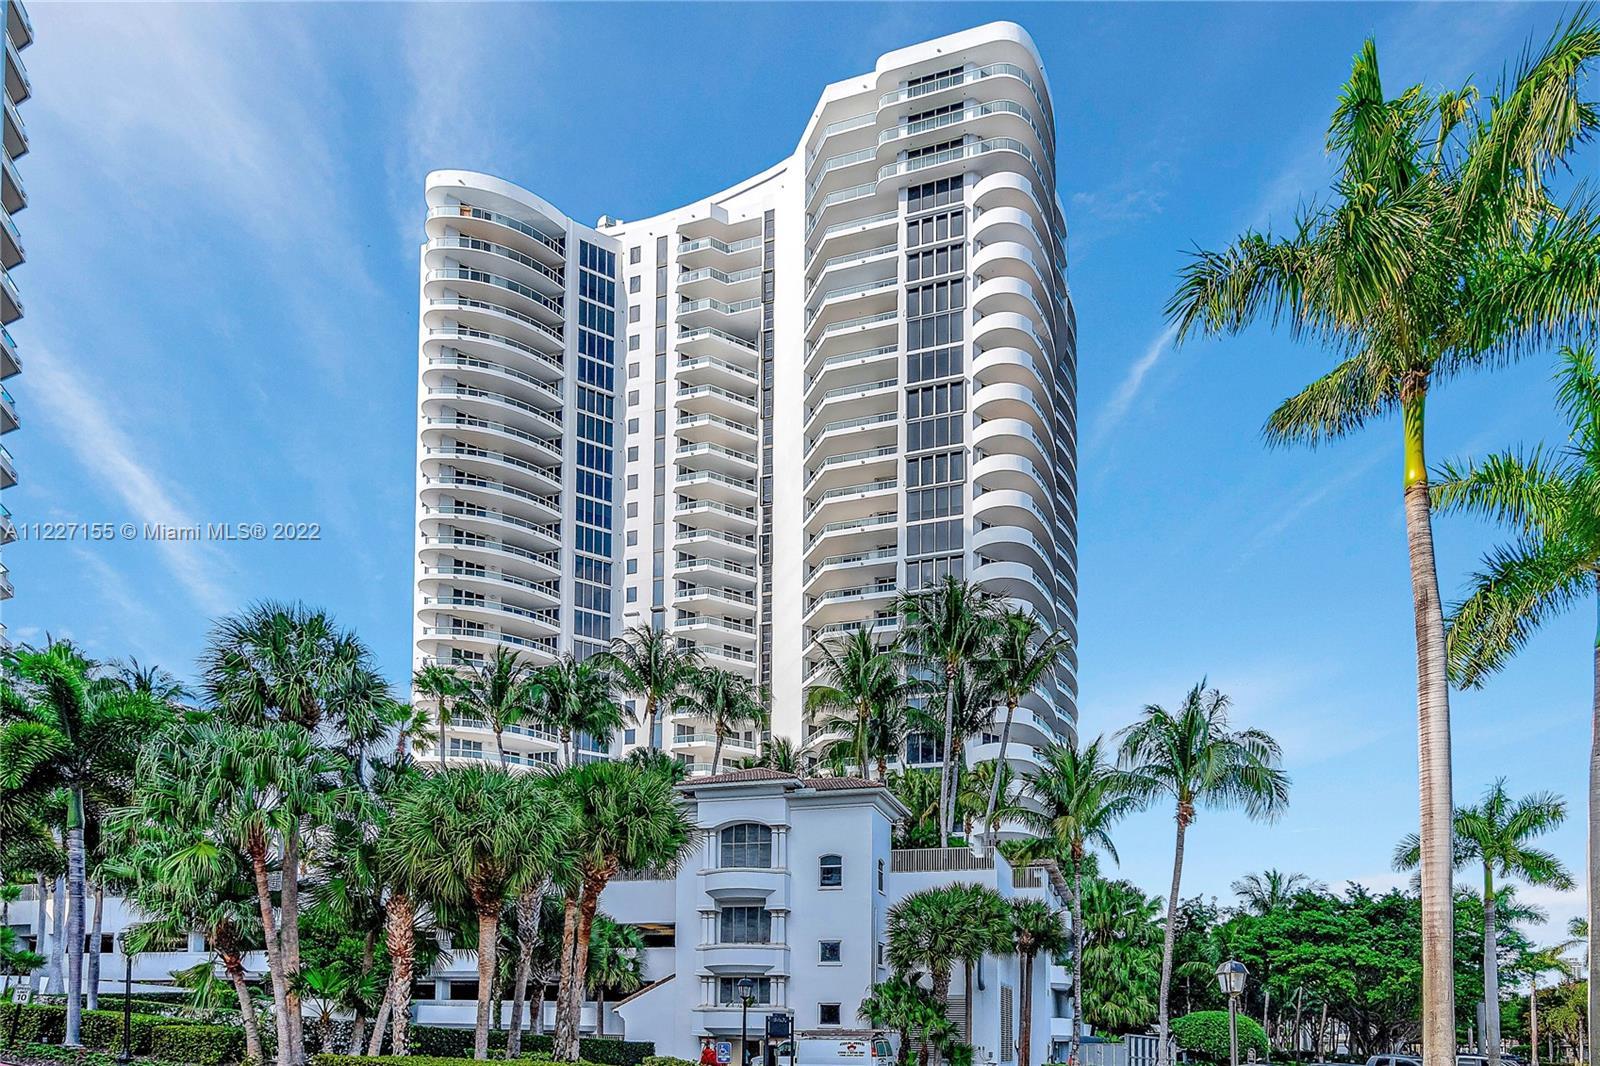 BEST AND UNIQUE OPPORTUNITY AT THE MOST DESIRABLE COMPLEX IN AVENTURA!! 3 Bedrooms, 3 Full Baths, 1 